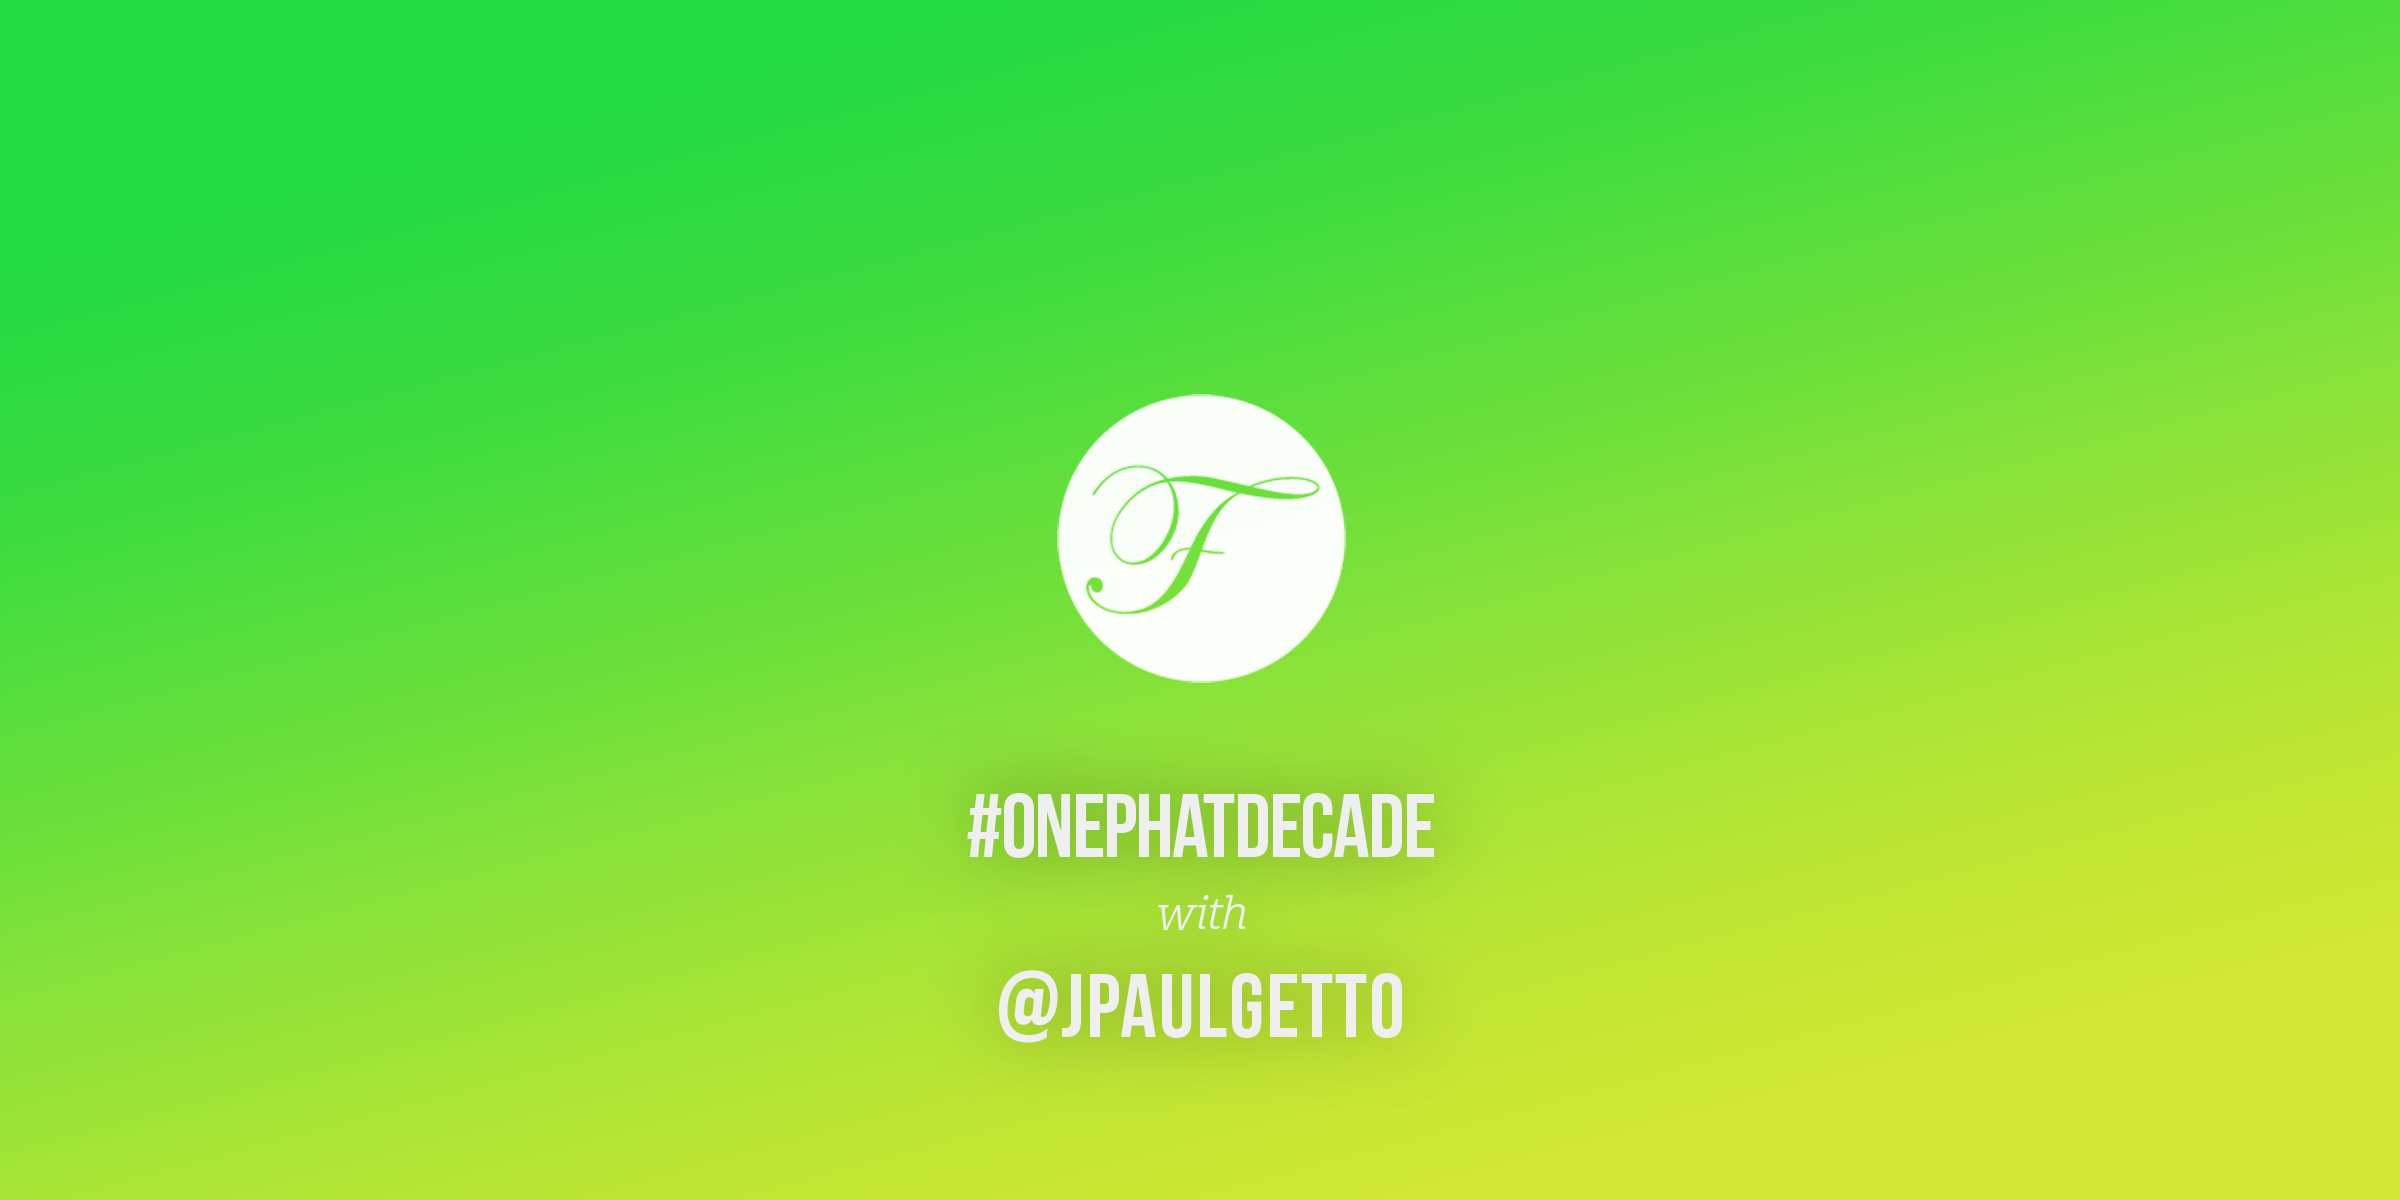 #ONEPHATDECADE Pt 6 – J Paul Getto LIVE from Milan, Italy